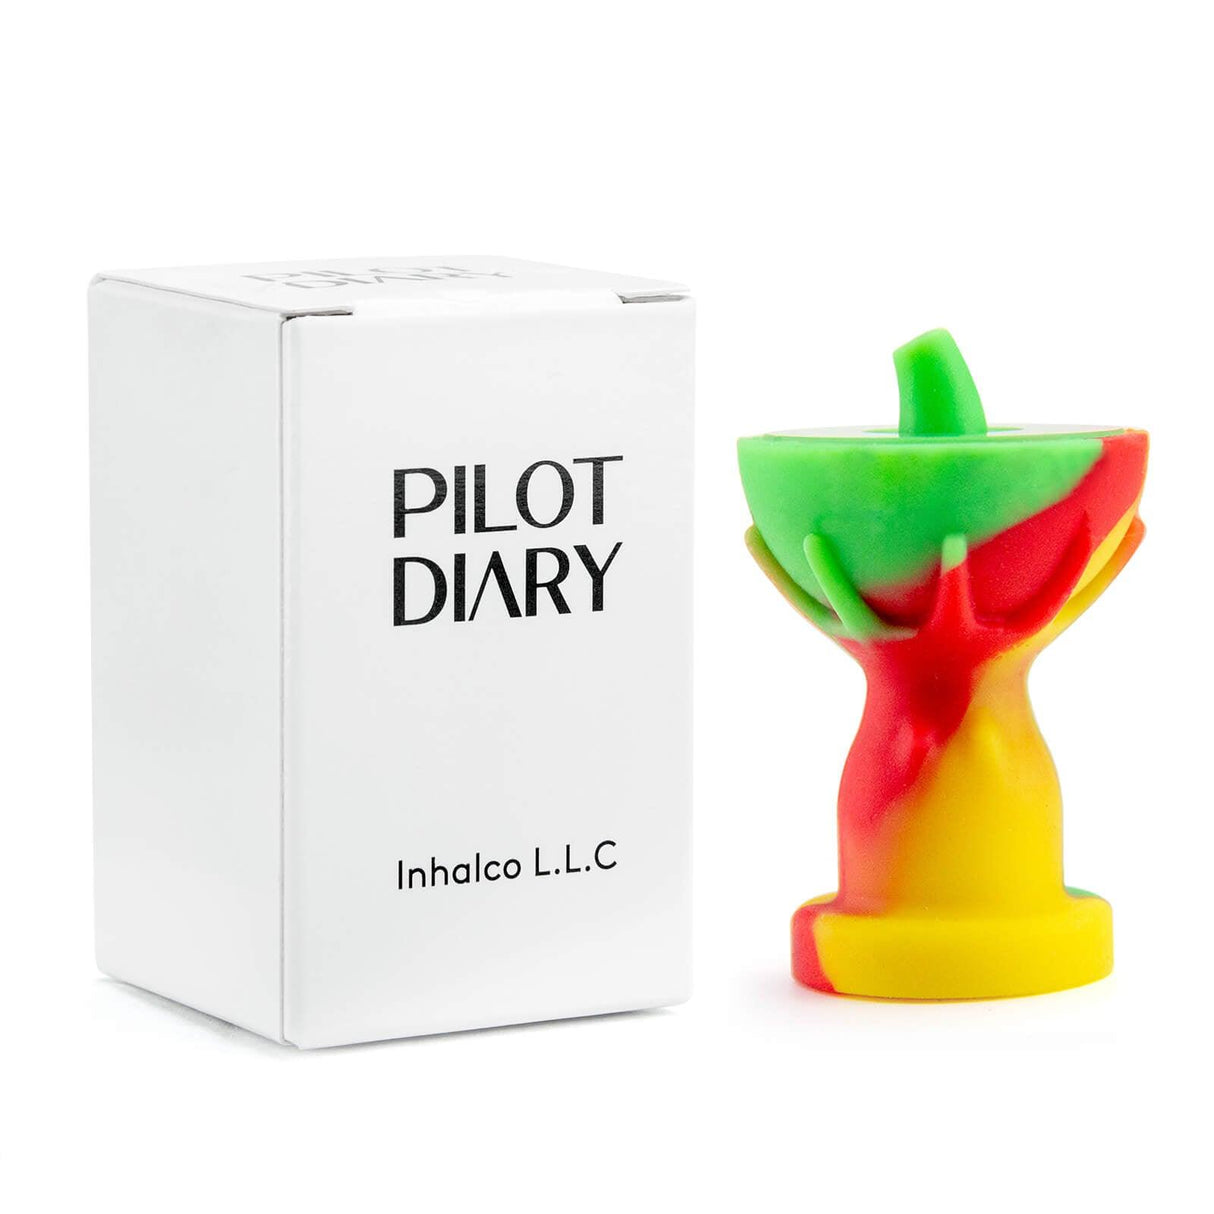 PILOT DIARY Silicone Carb Cap with Glass Bowl Screen - Rasta Colors Side View